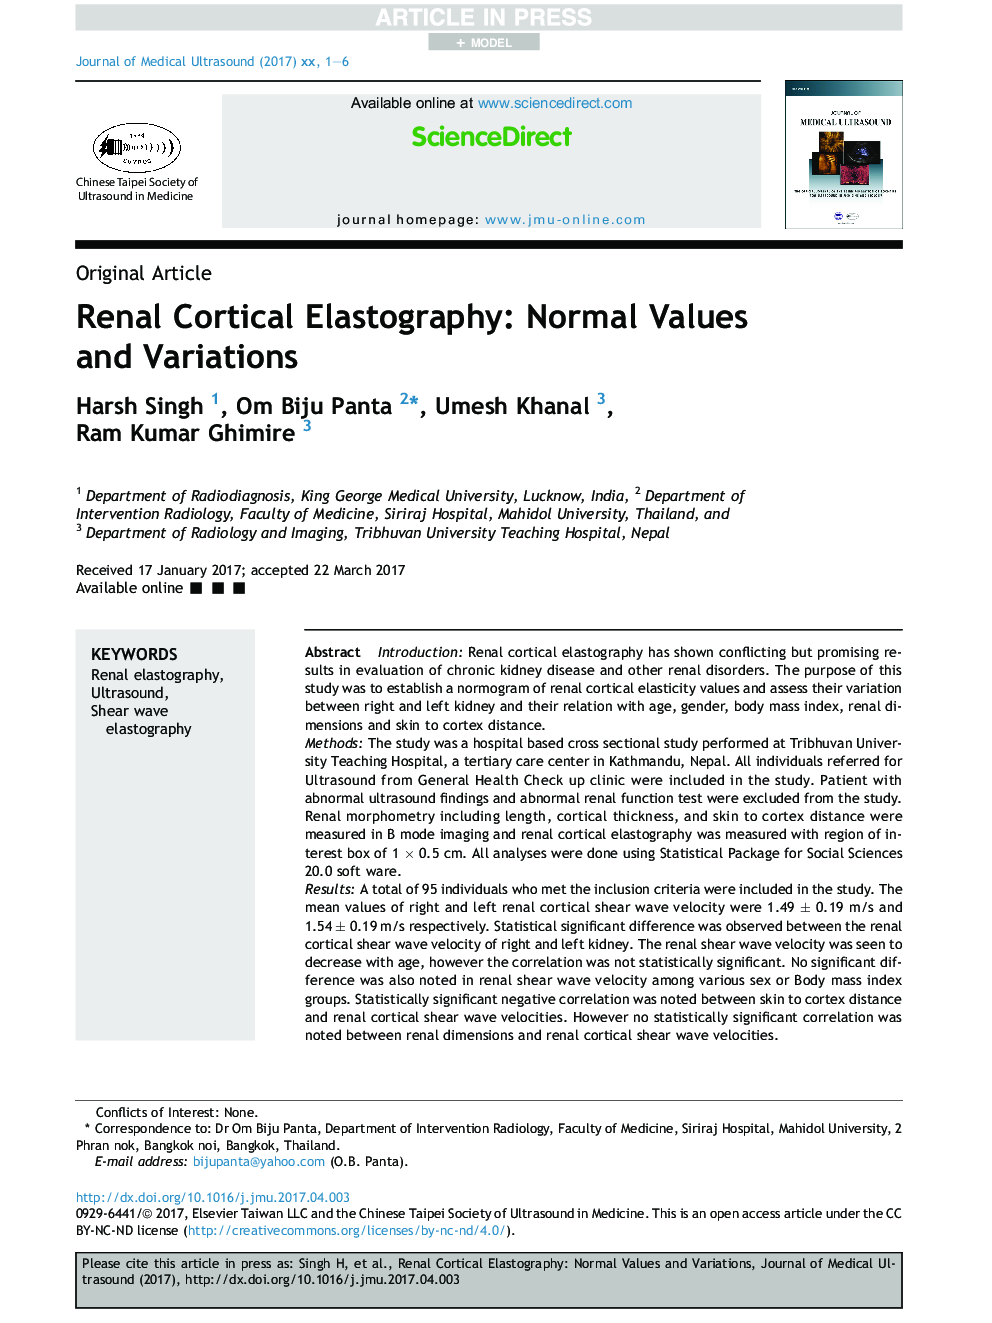 Renal Cortical Elastography: Normal Values and Variations